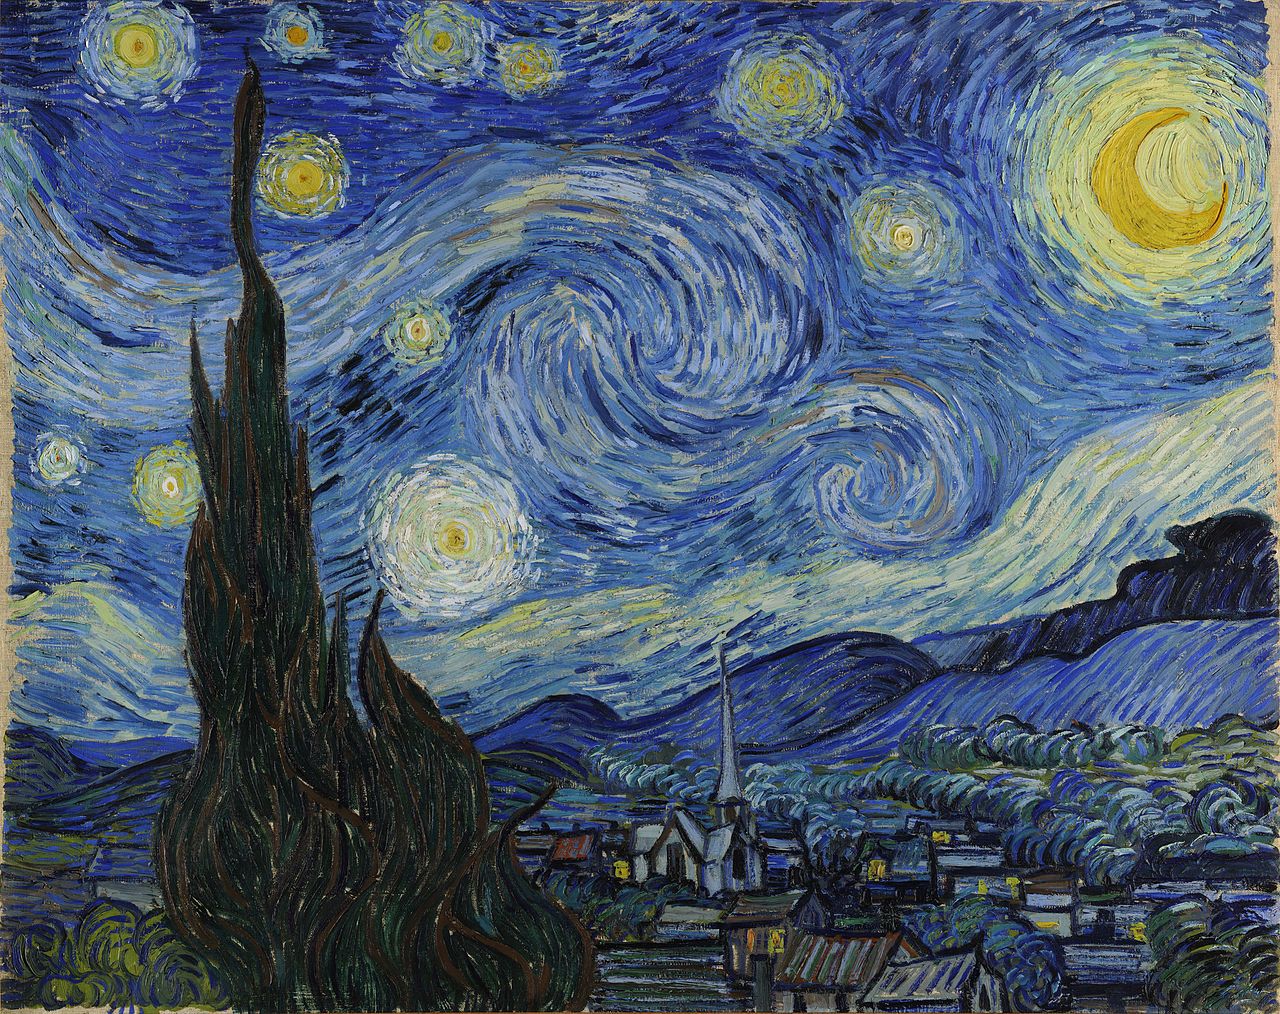 Photograph of Van Gogh's The Starry Night painting. 